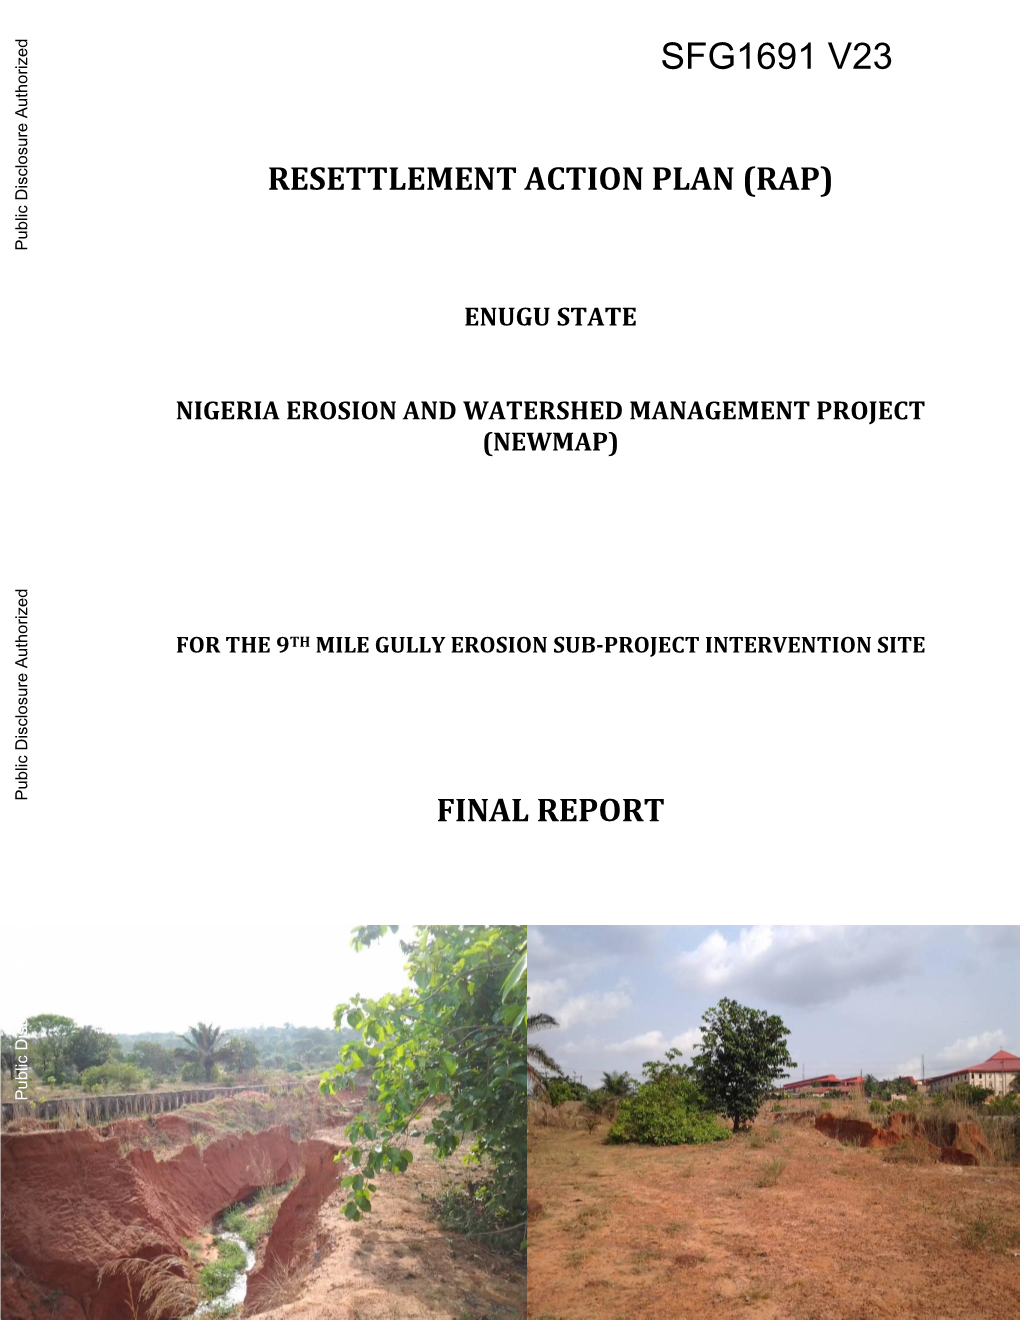 Resettlement Action Plan (Rap) Enugu State Nigeria Erosion and Watershed